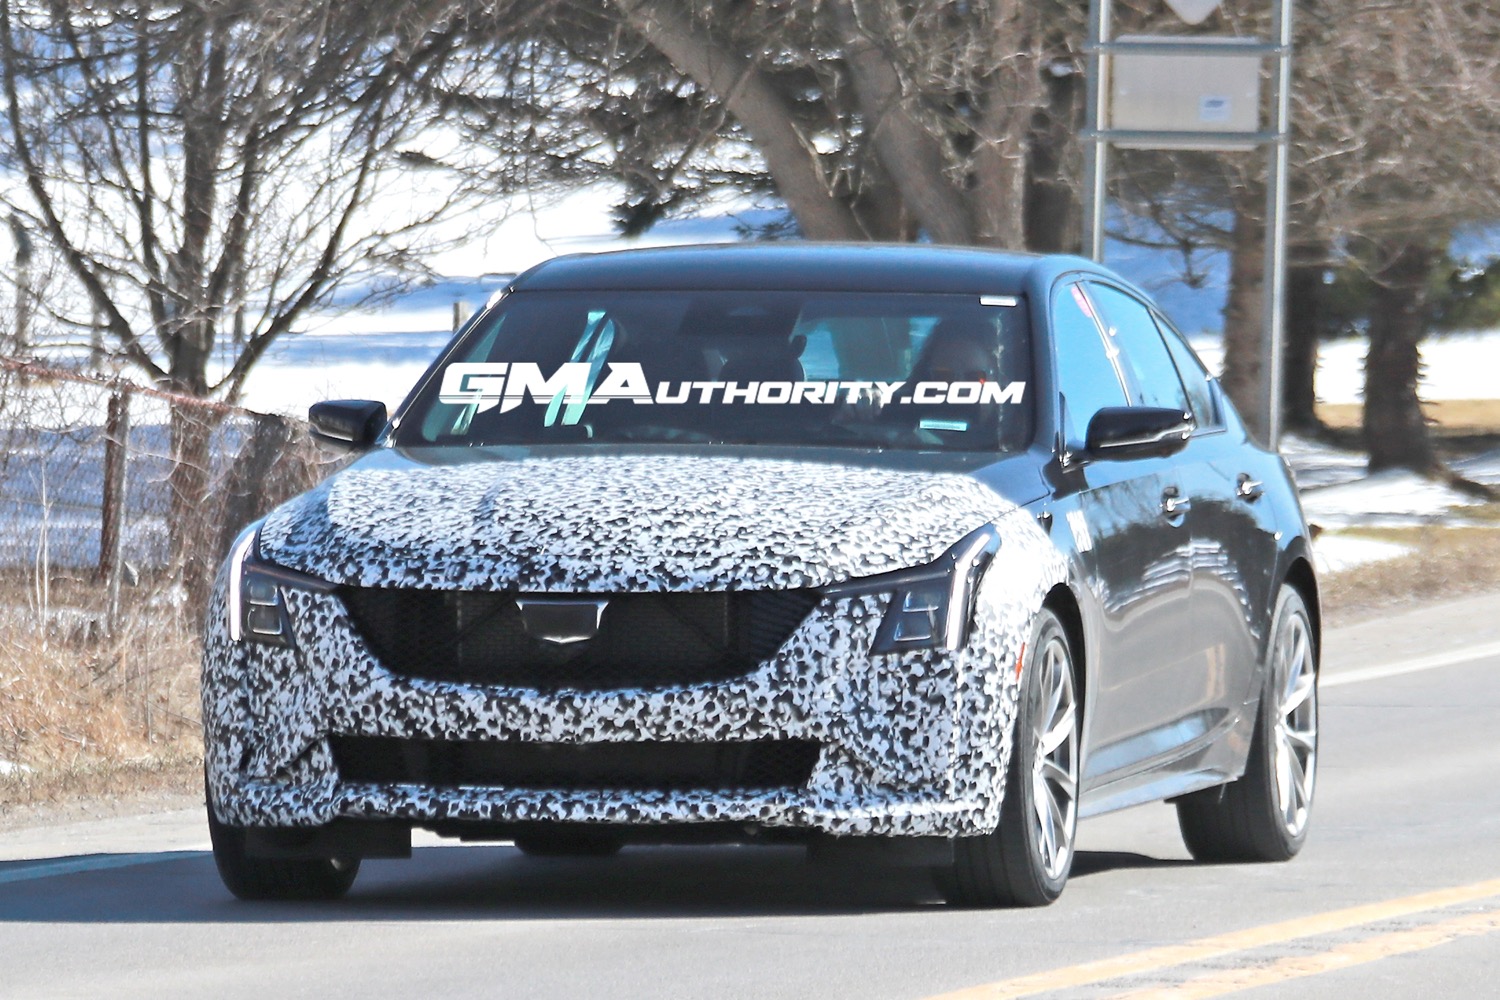 2024 Cadillac CT5V Refresh Breaks Cover, Shows Updates